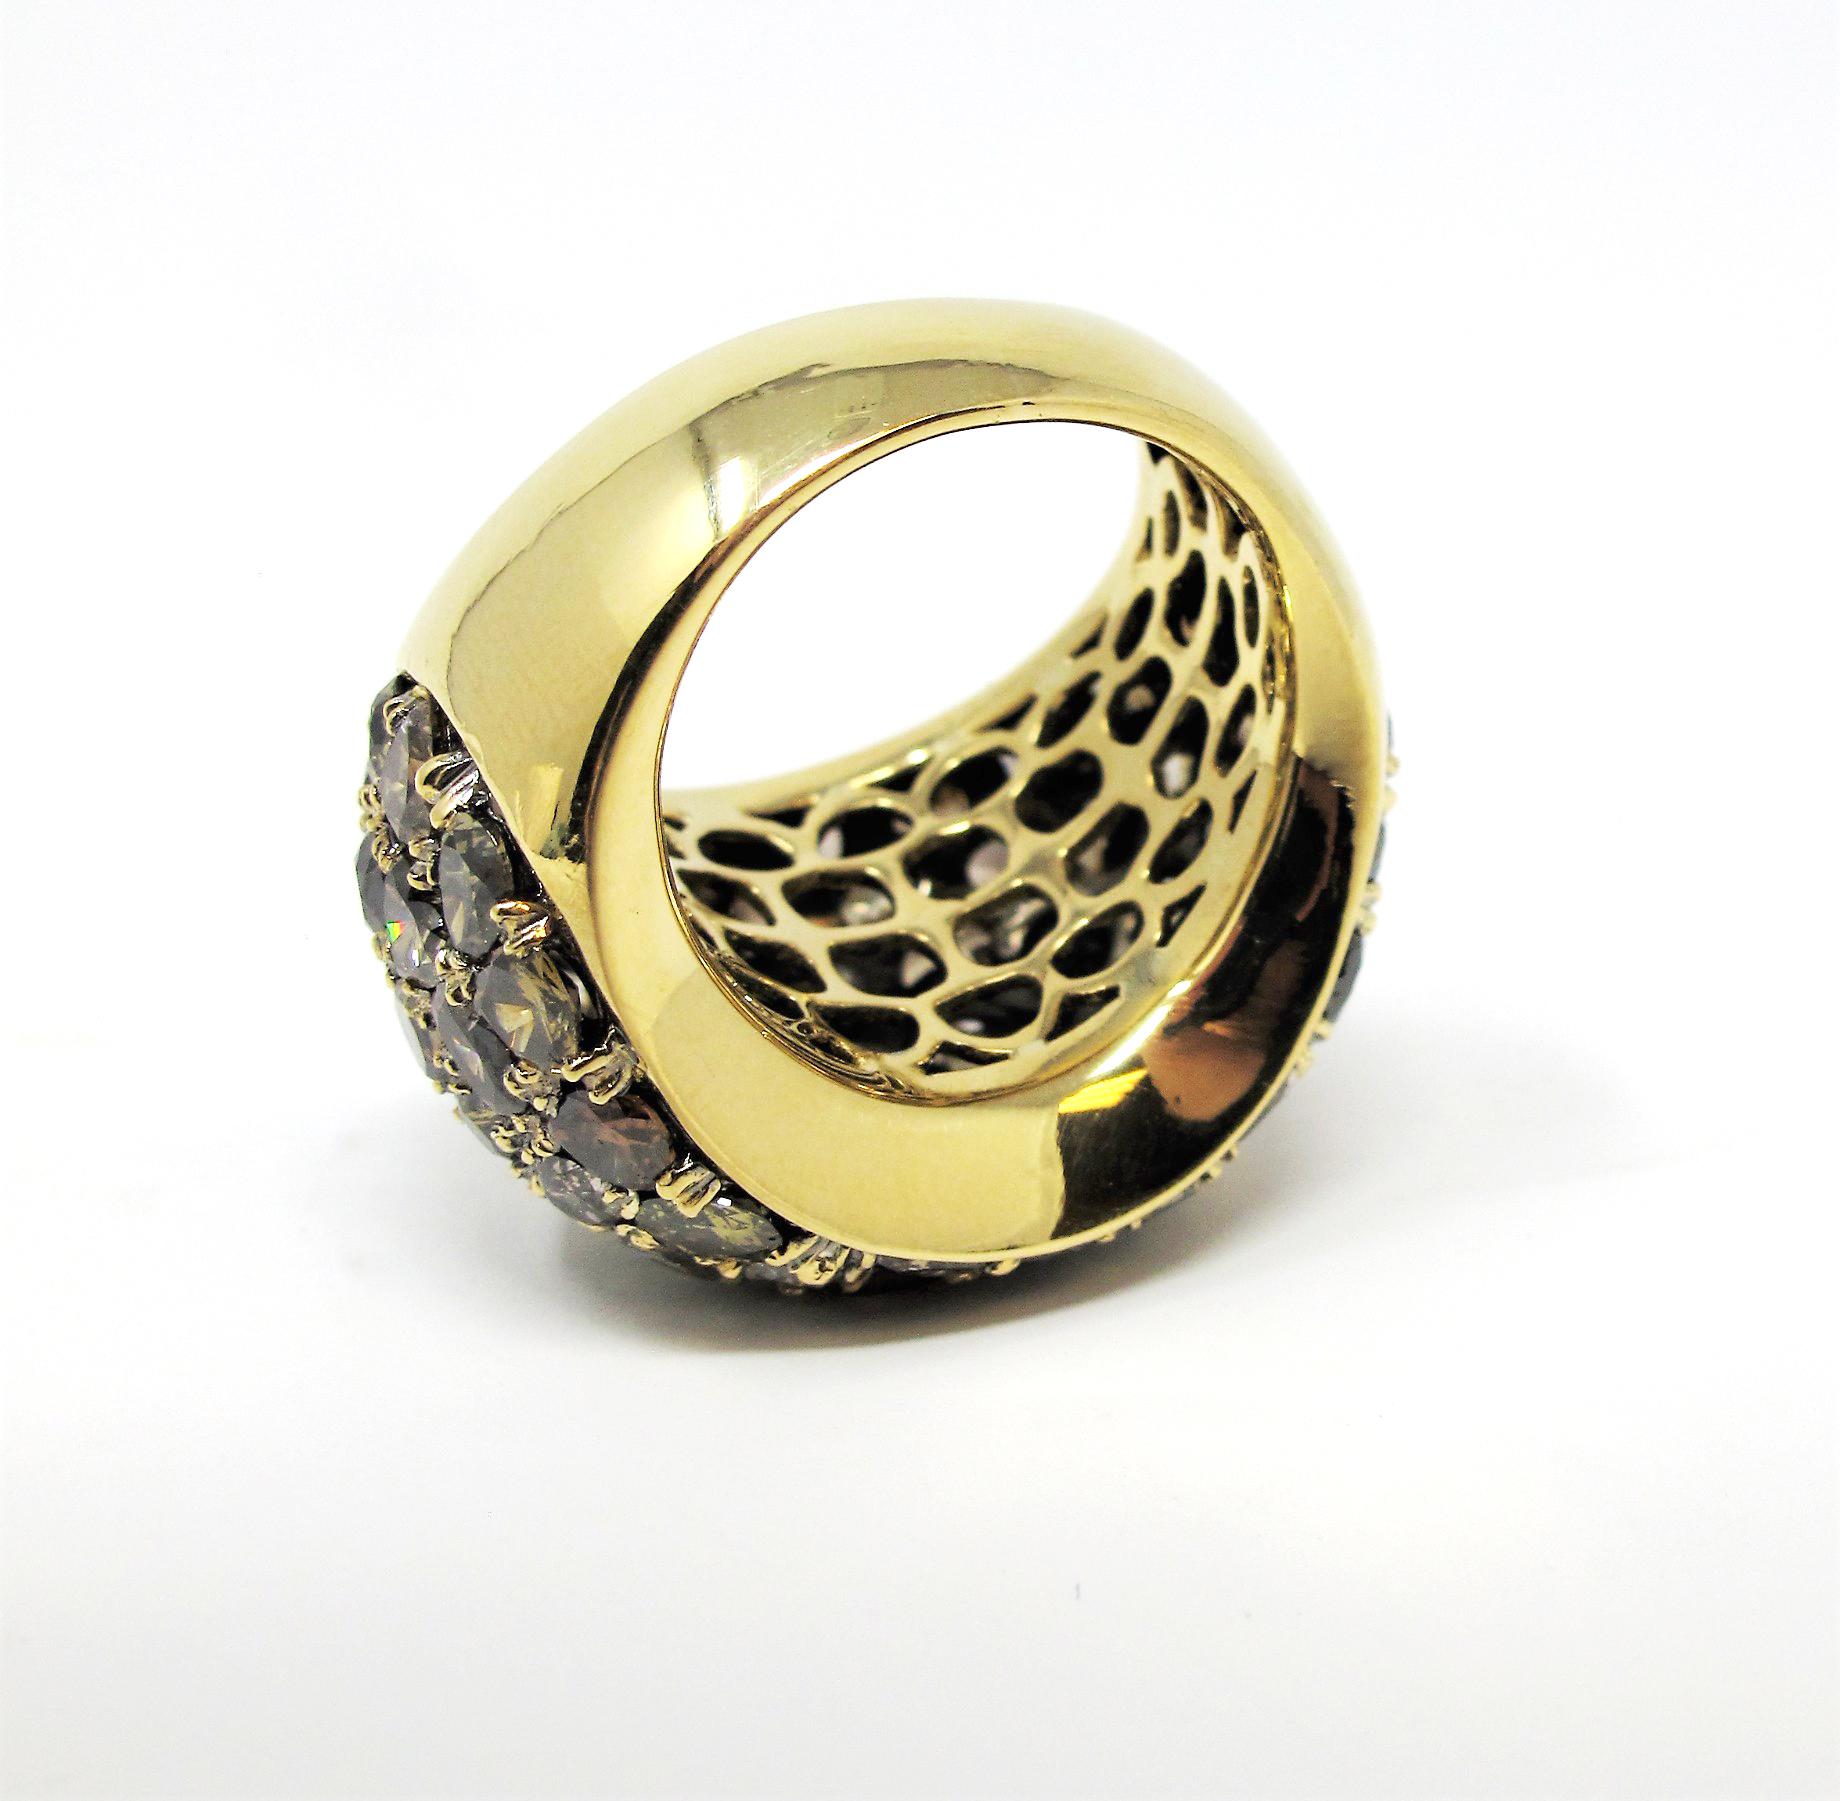 Large Bombe Fancy Cognac Diamond Multi Cut Pave Dome Ring in 18 Karat Gold In Good Condition For Sale In Scottsdale, AZ